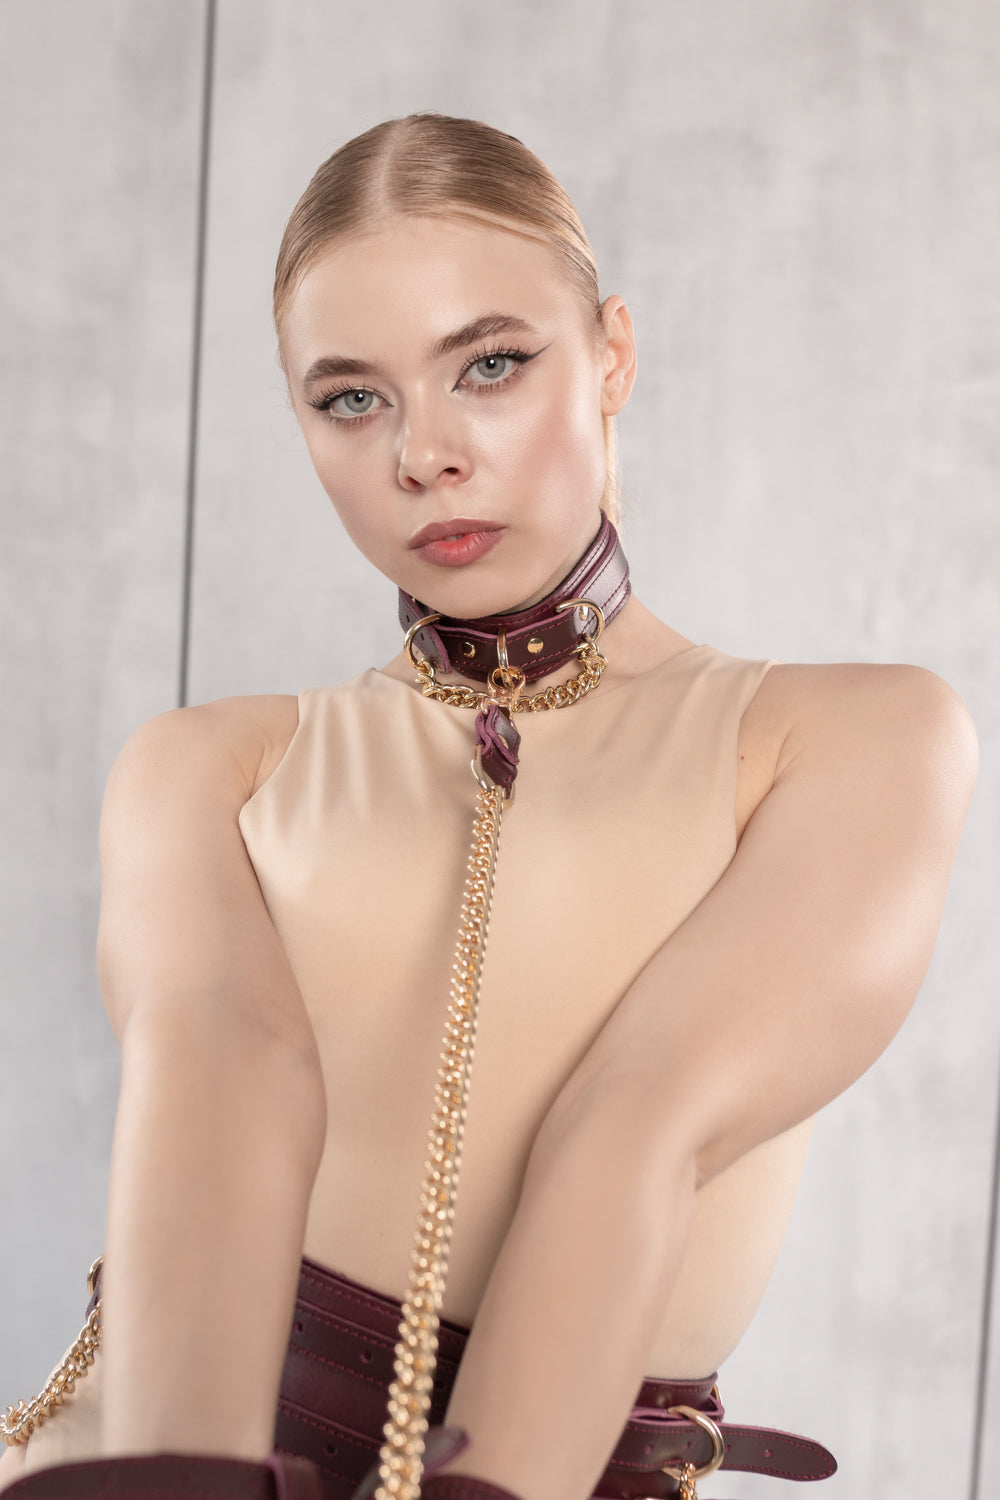 Leather Collar with D-rings and Chain